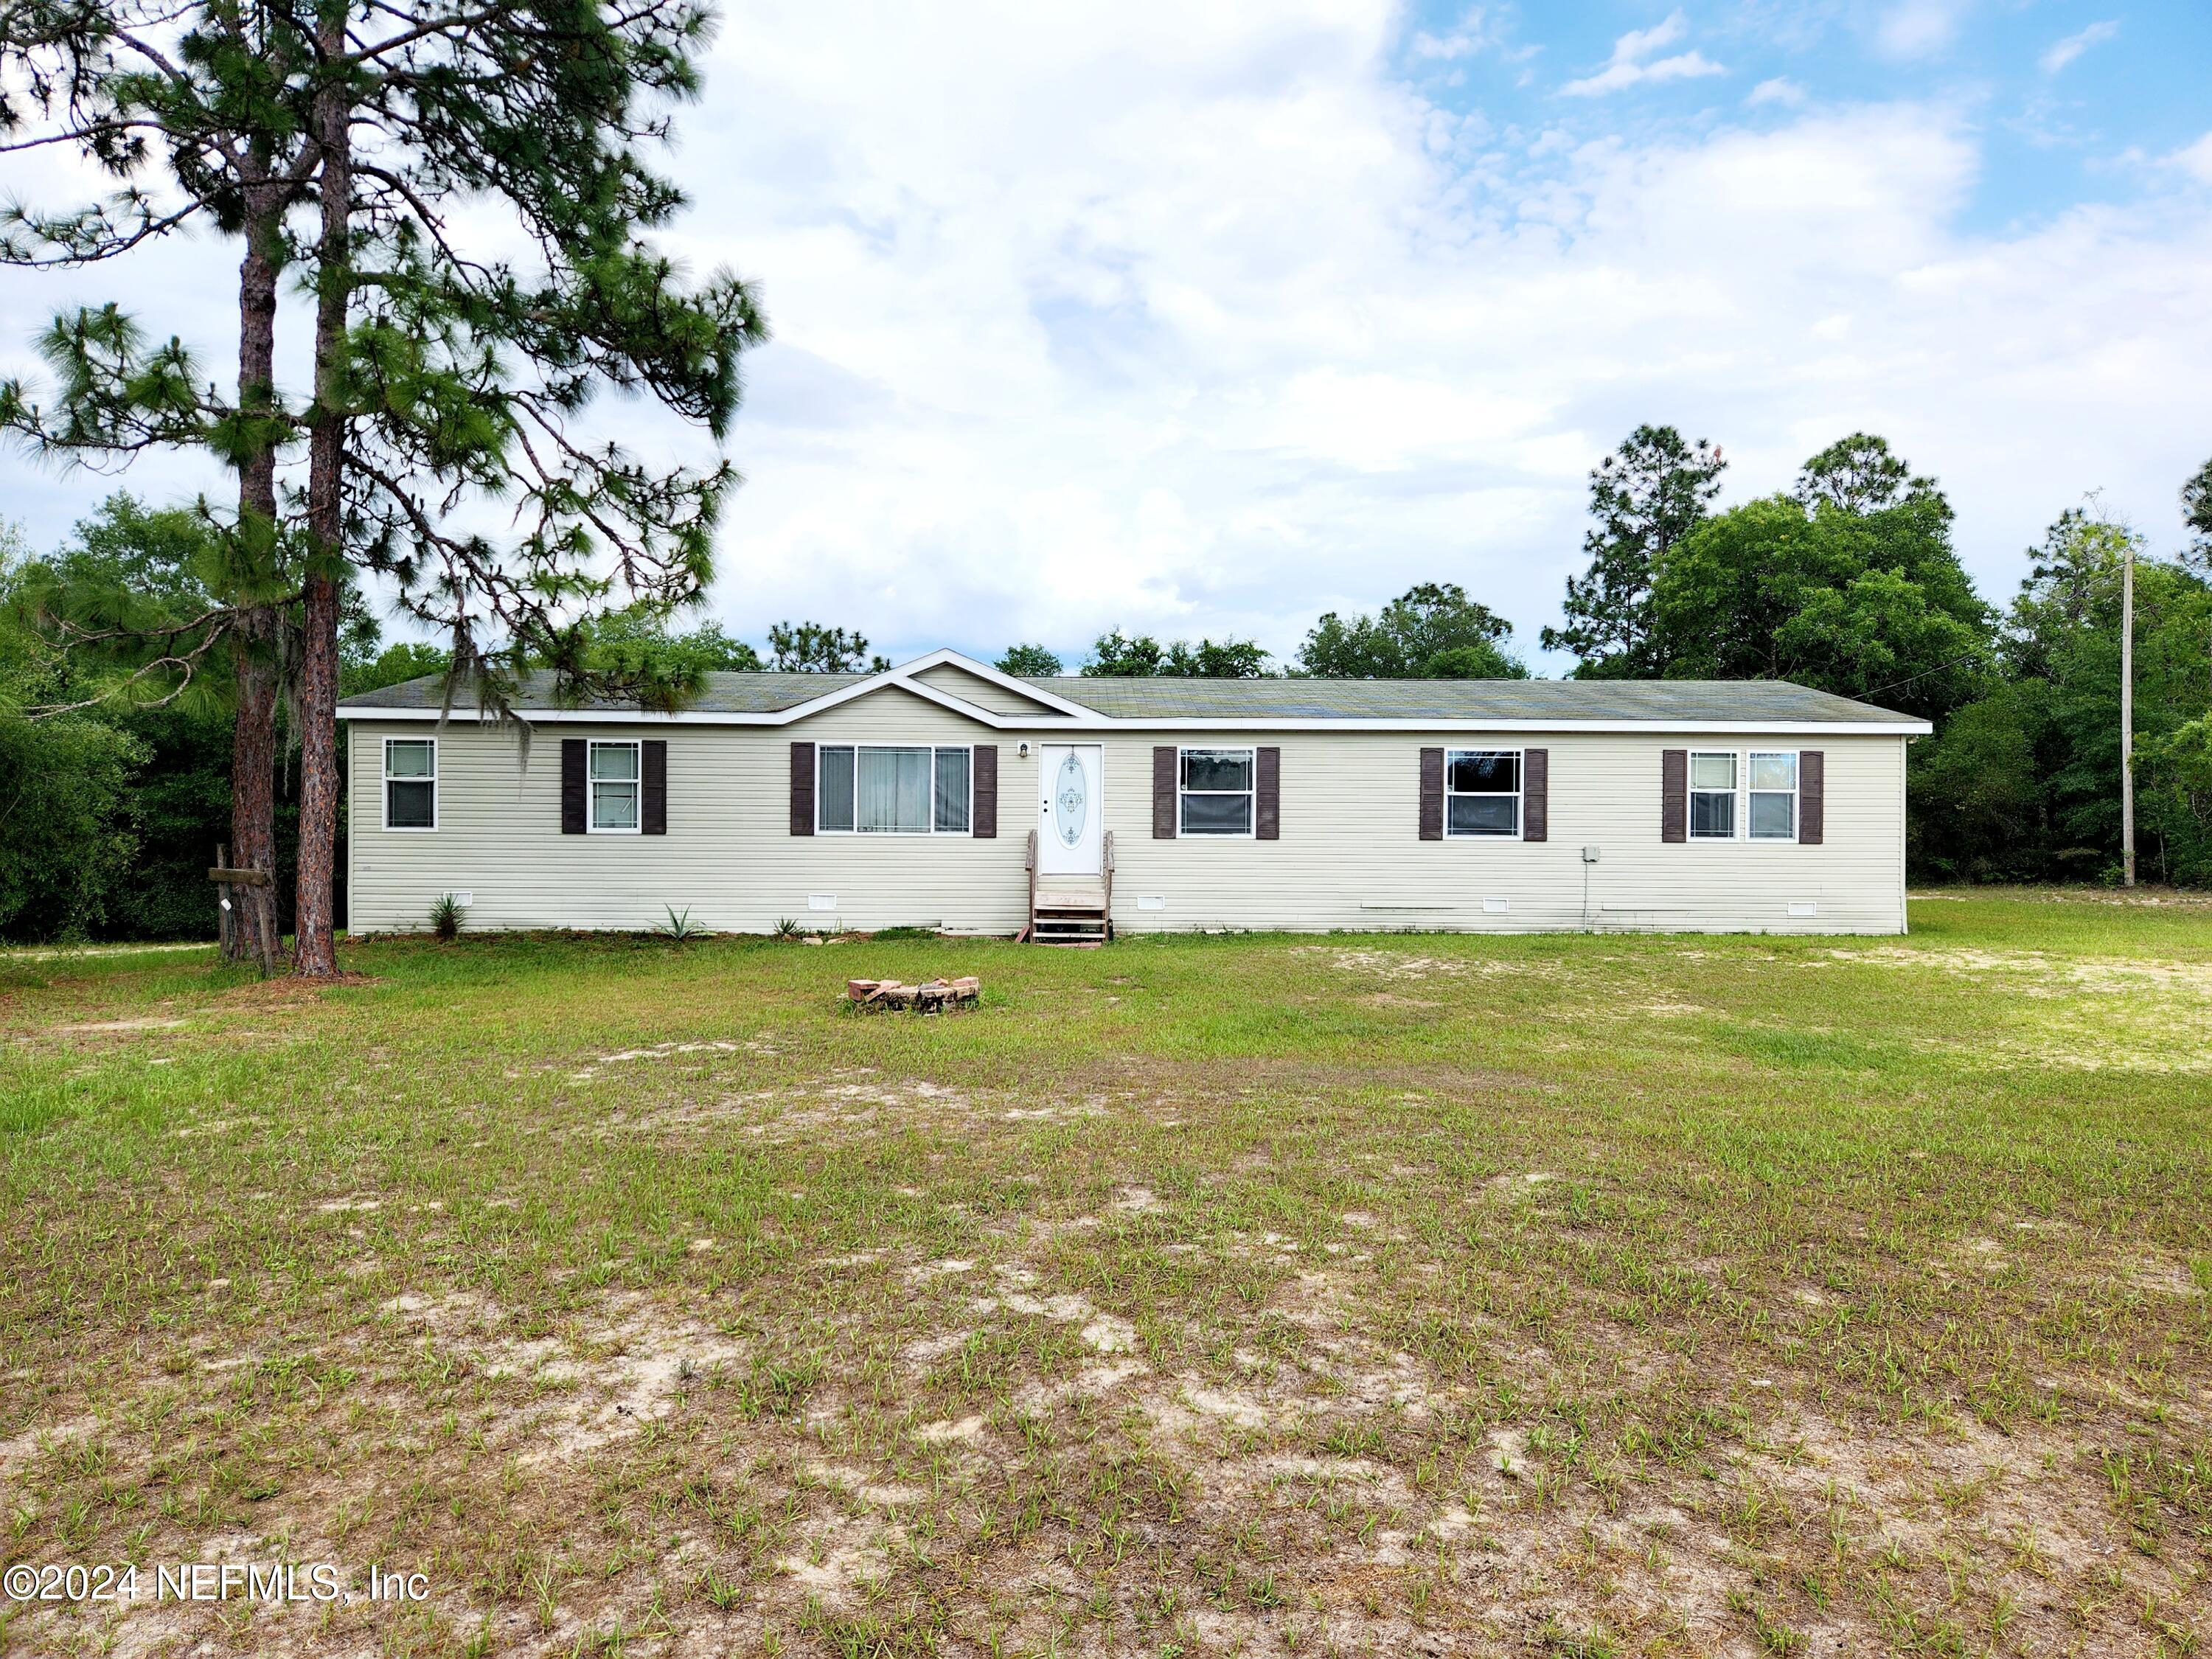 Keystone Heights, FL home for sale located at 7655 Los Padres Avenue, Keystone Heights, FL 32656